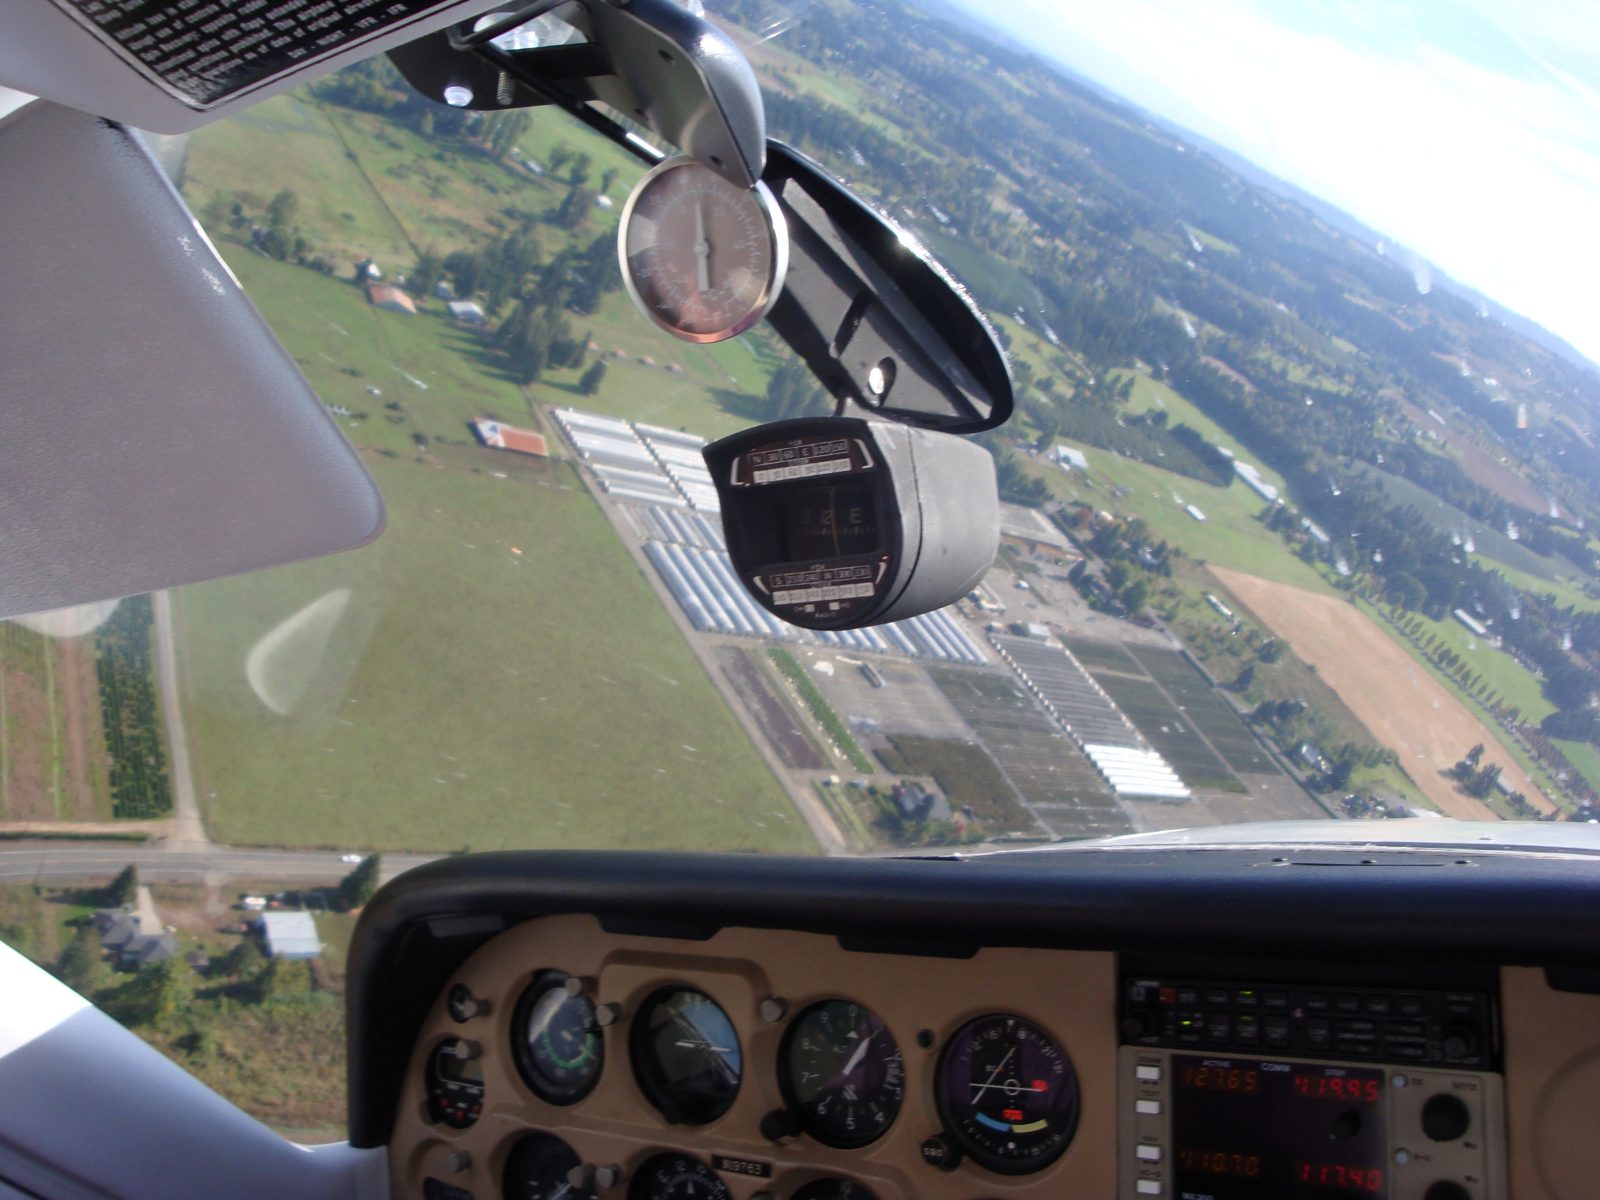 Here’s a shot of us banking for our landing approach.